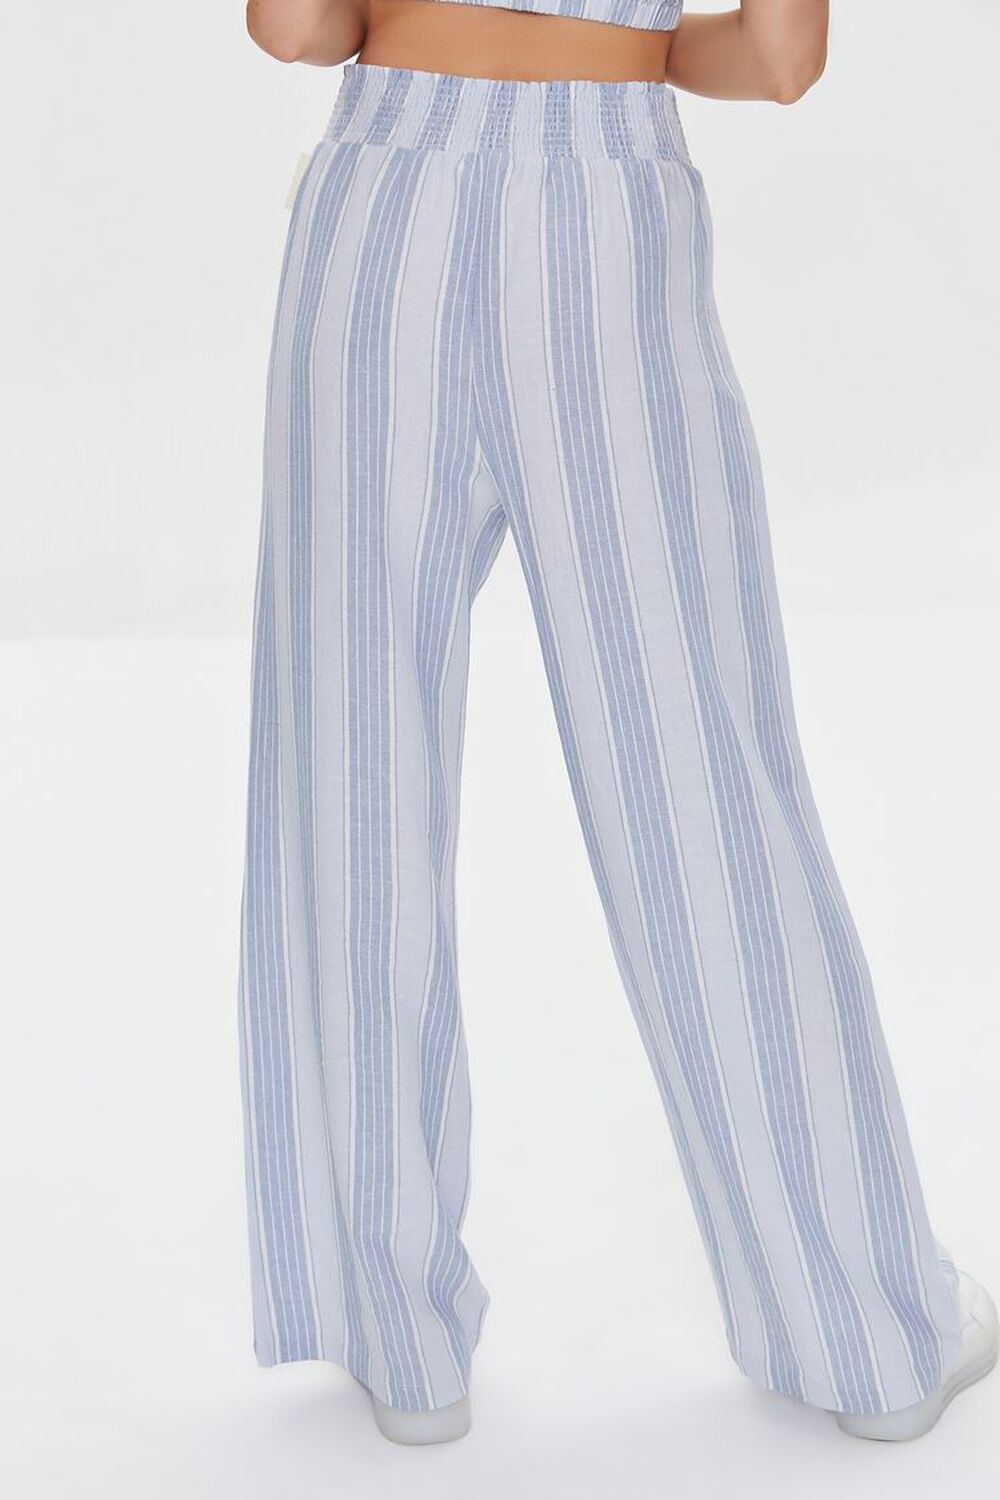 Kendall + Kylie Striped Pants